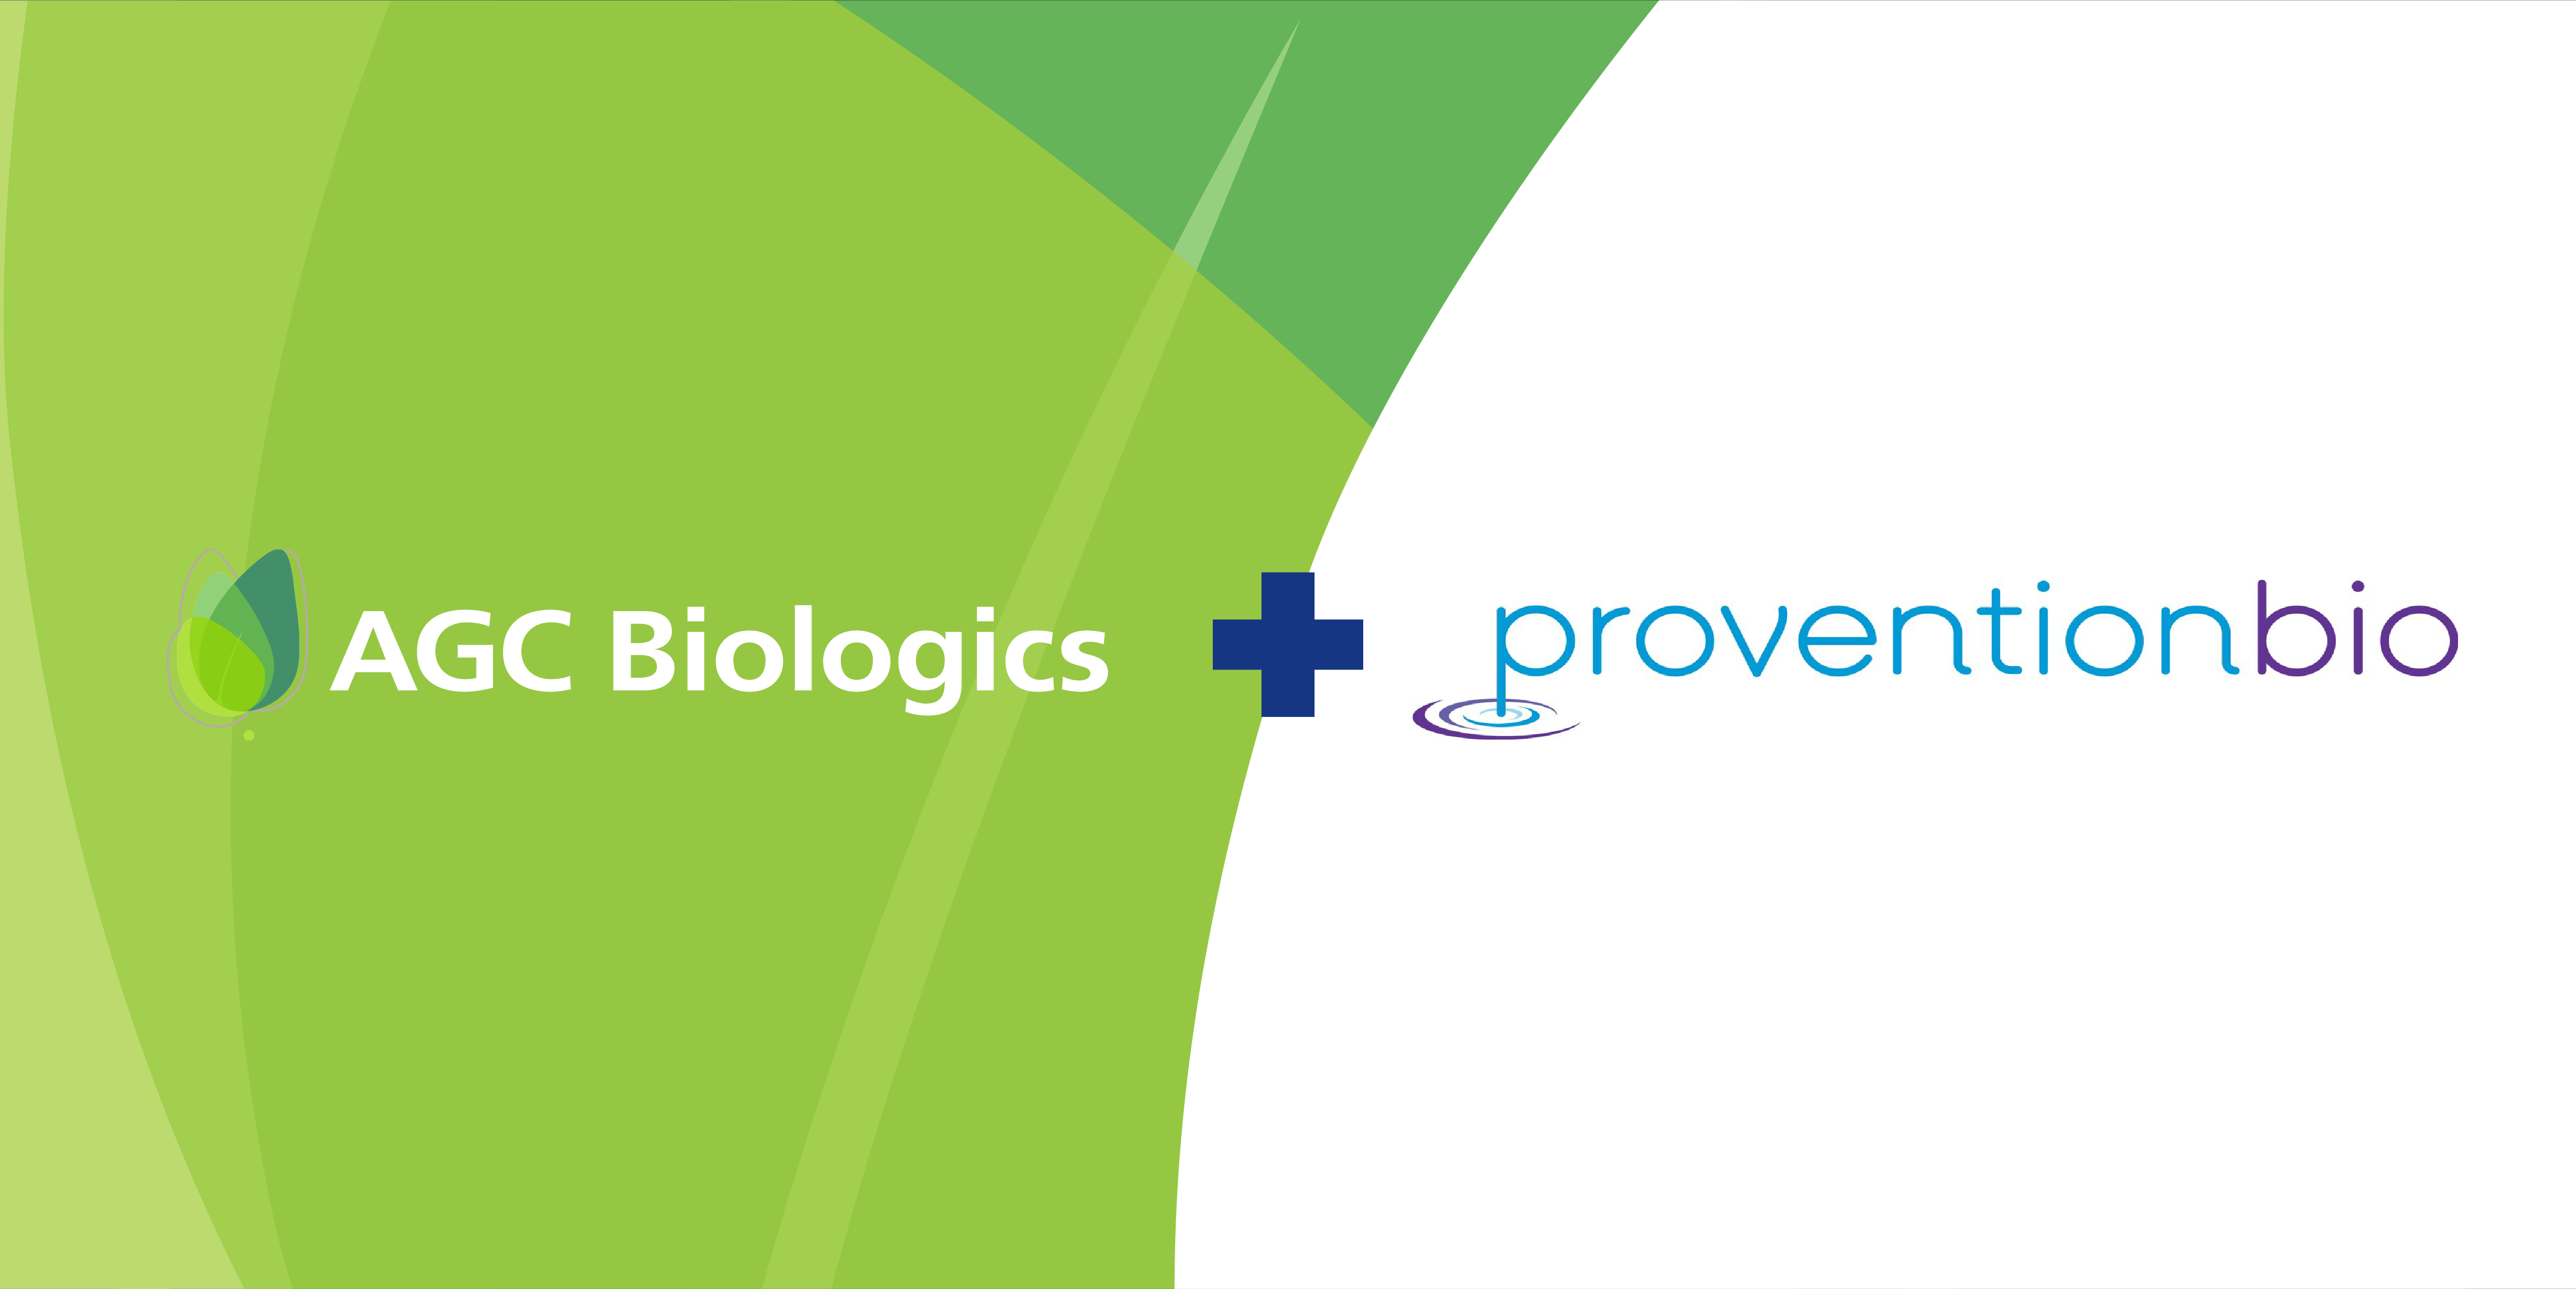 AGC Biologics Commercially Manufacture Provention Bio Diabetes Therapy